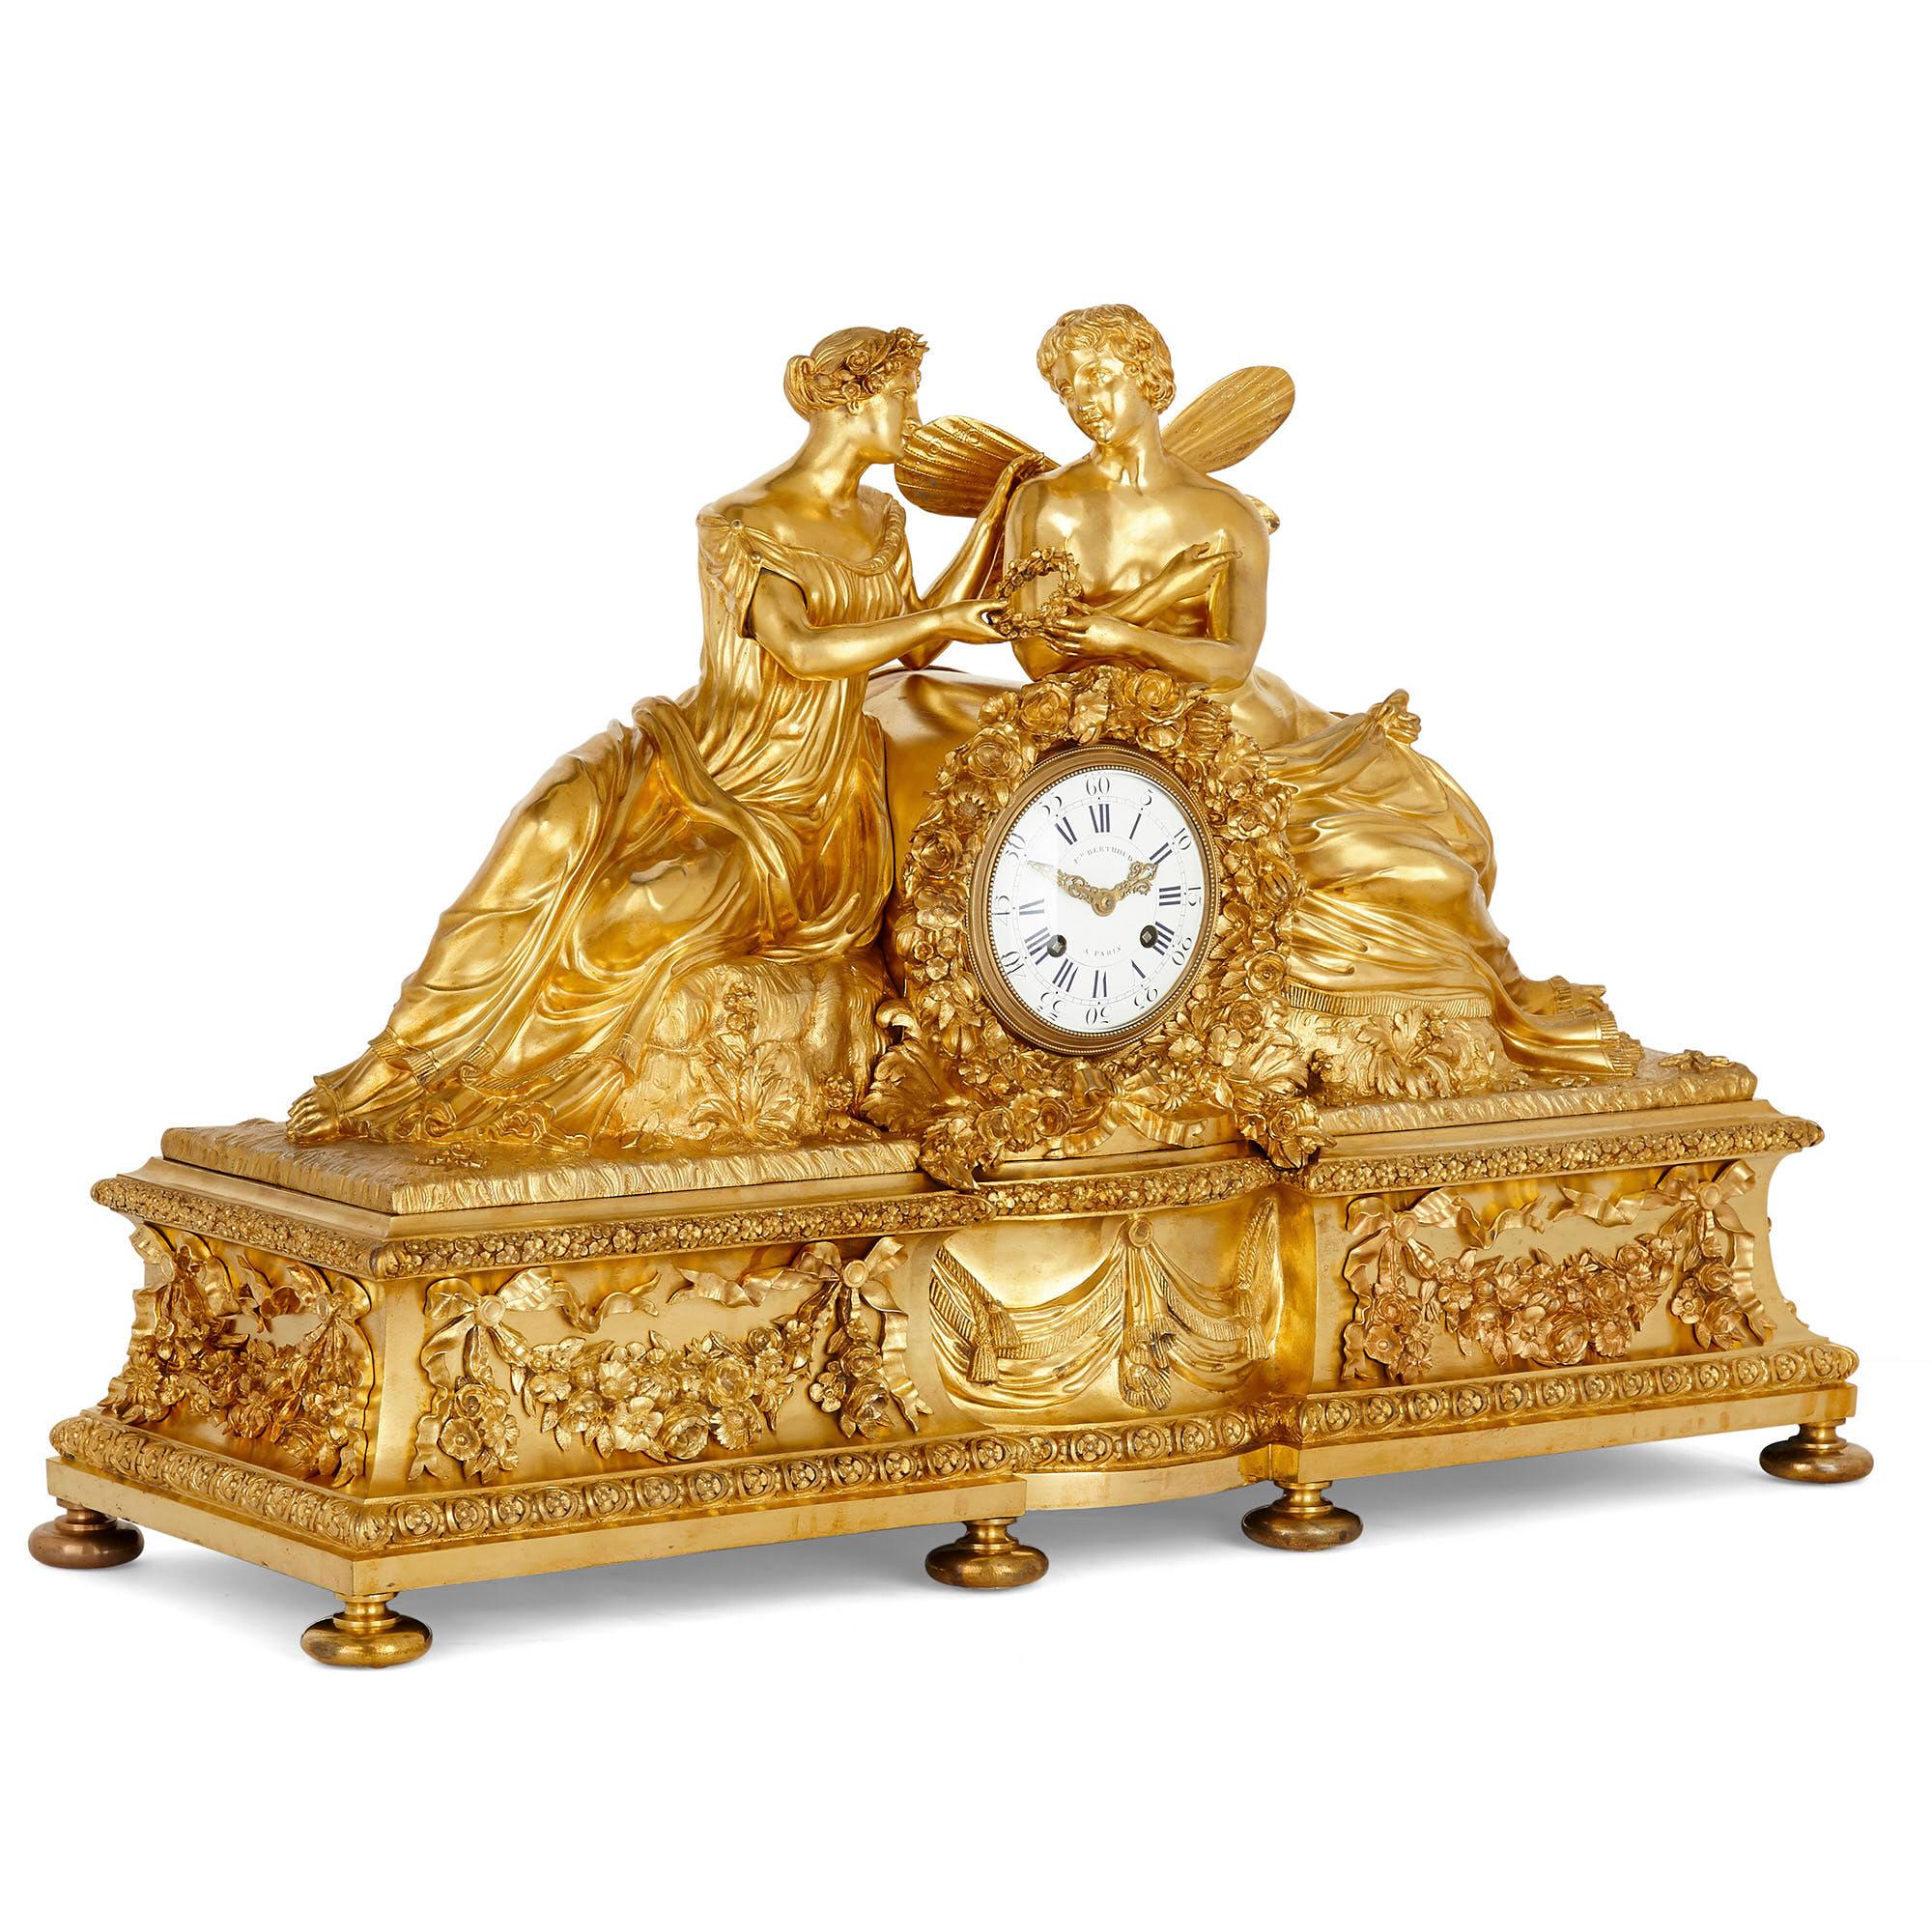 Large neoclassical style gilt bronze mantel clock with cupid and psyche
French, 19th century
Measures: Height 54cm, width 80cm, depth 30cm

This beautiful mantel clock features a case wrought entirely from gilt bronze in the ornate Louis XVI